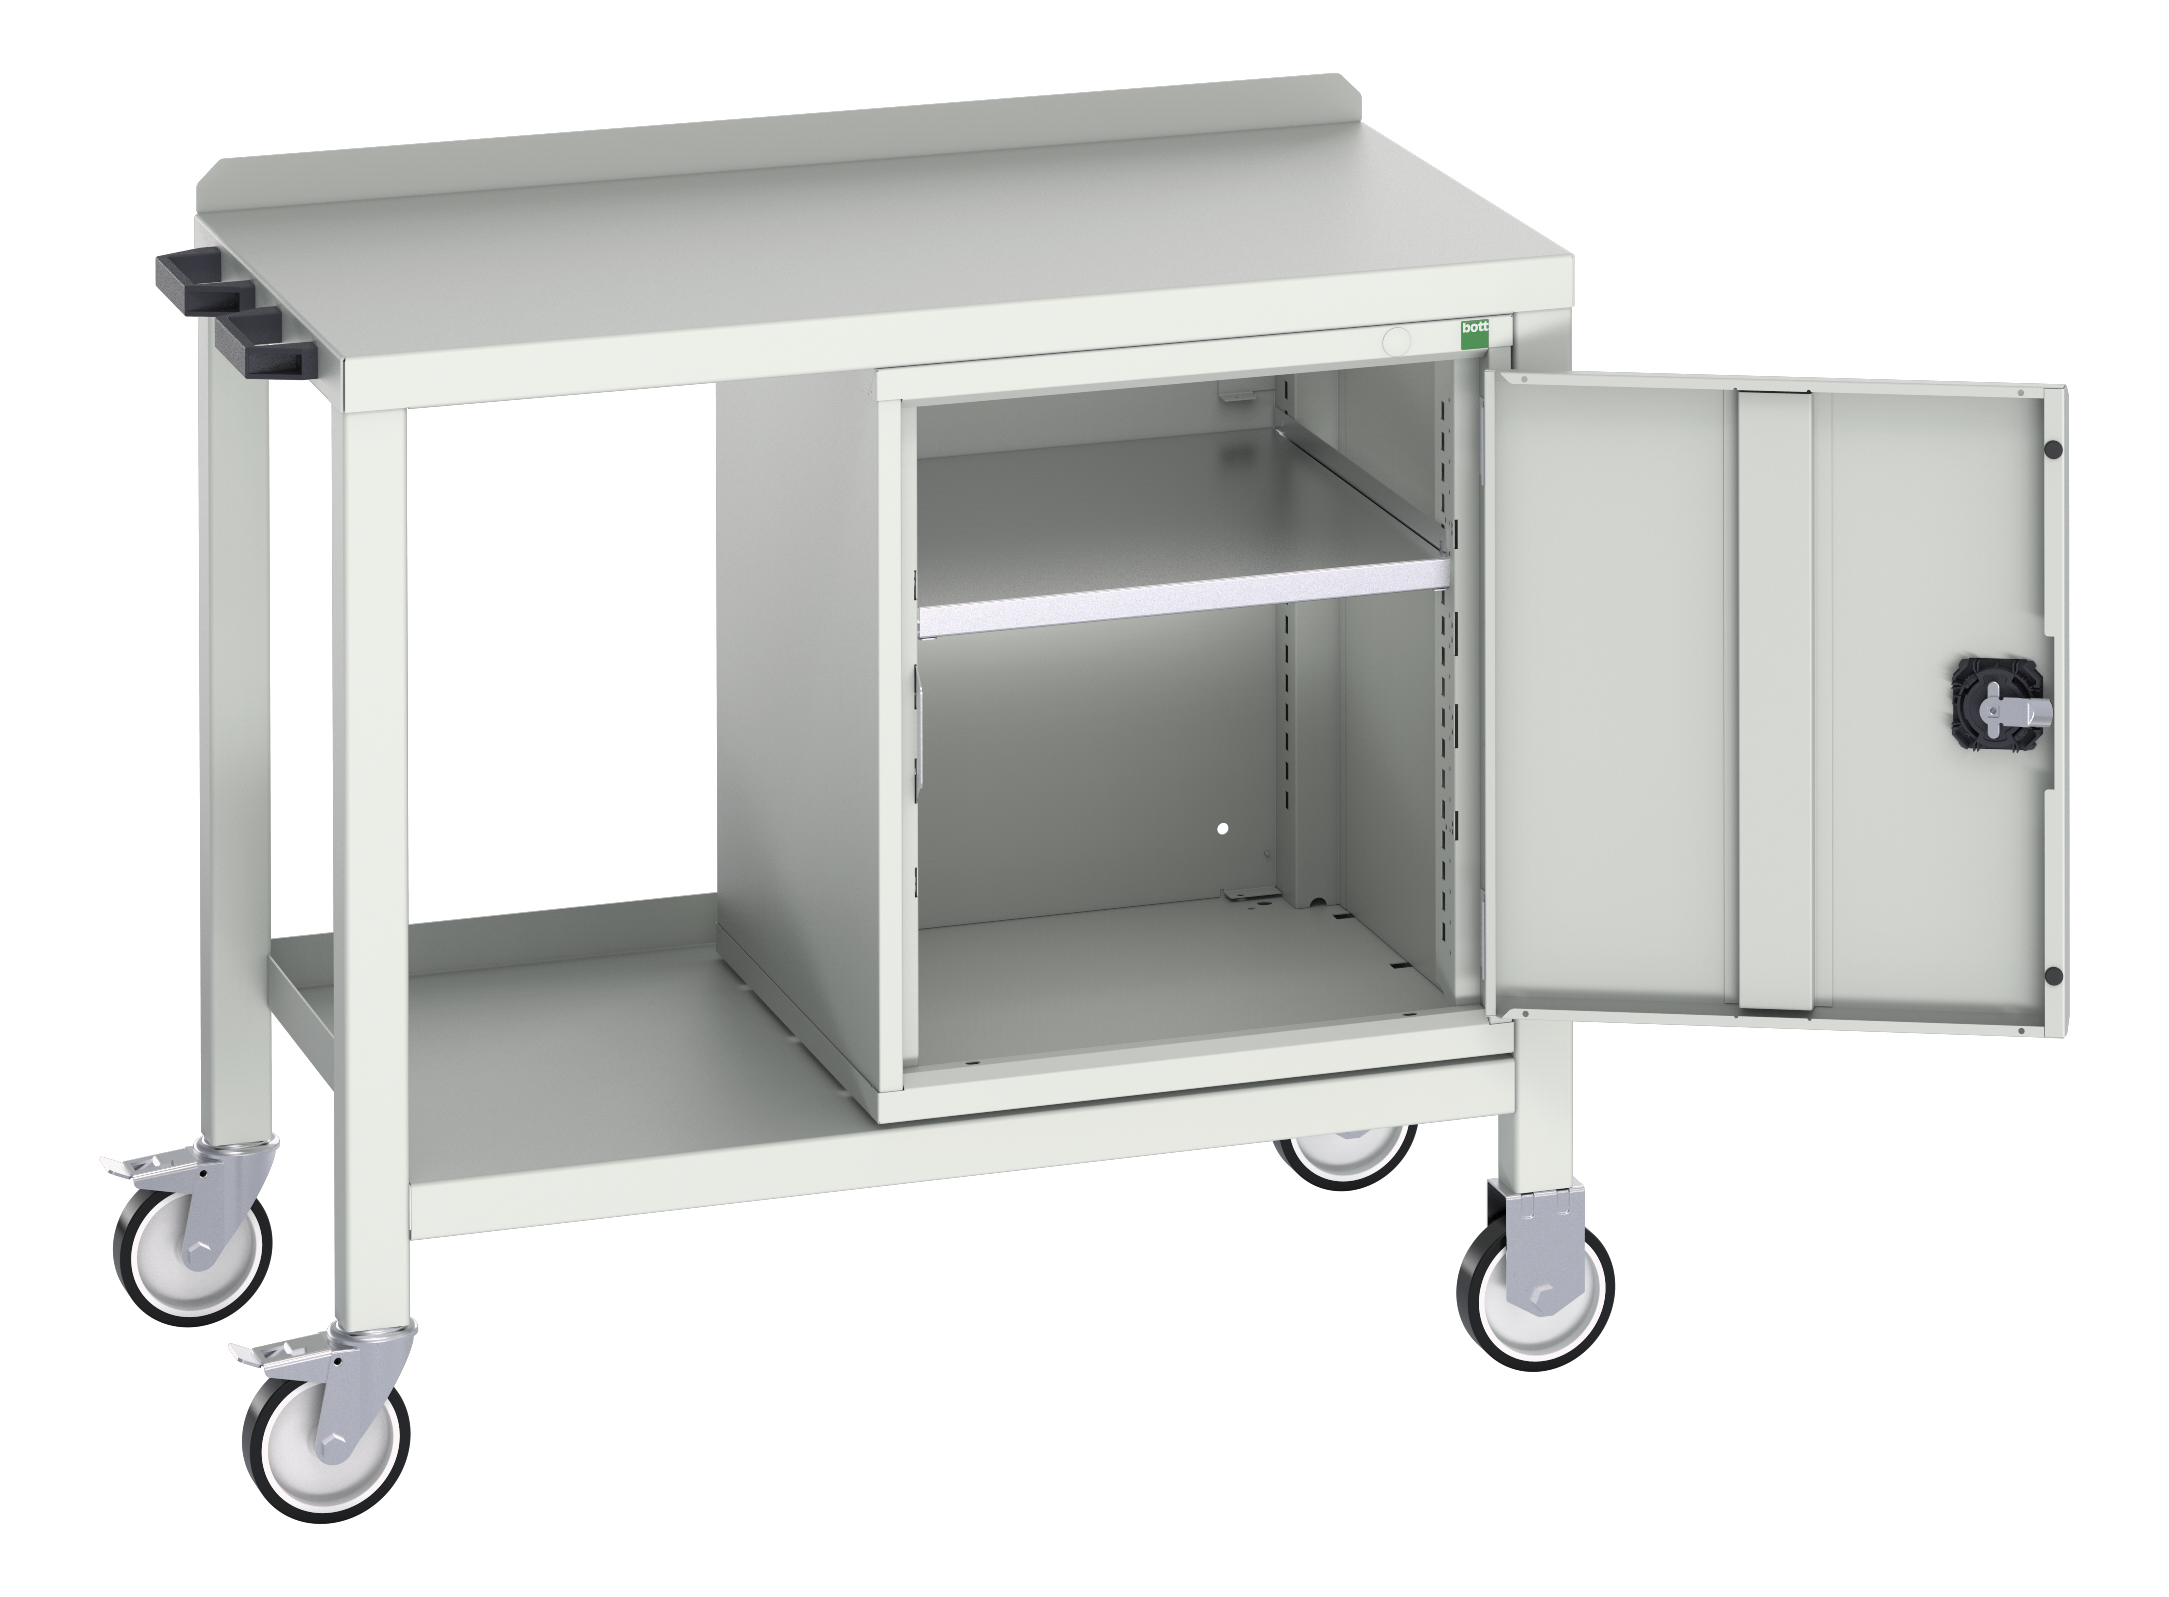 Bott Verso Mobile Welded Bench With Full Cupboard - 16922802.16